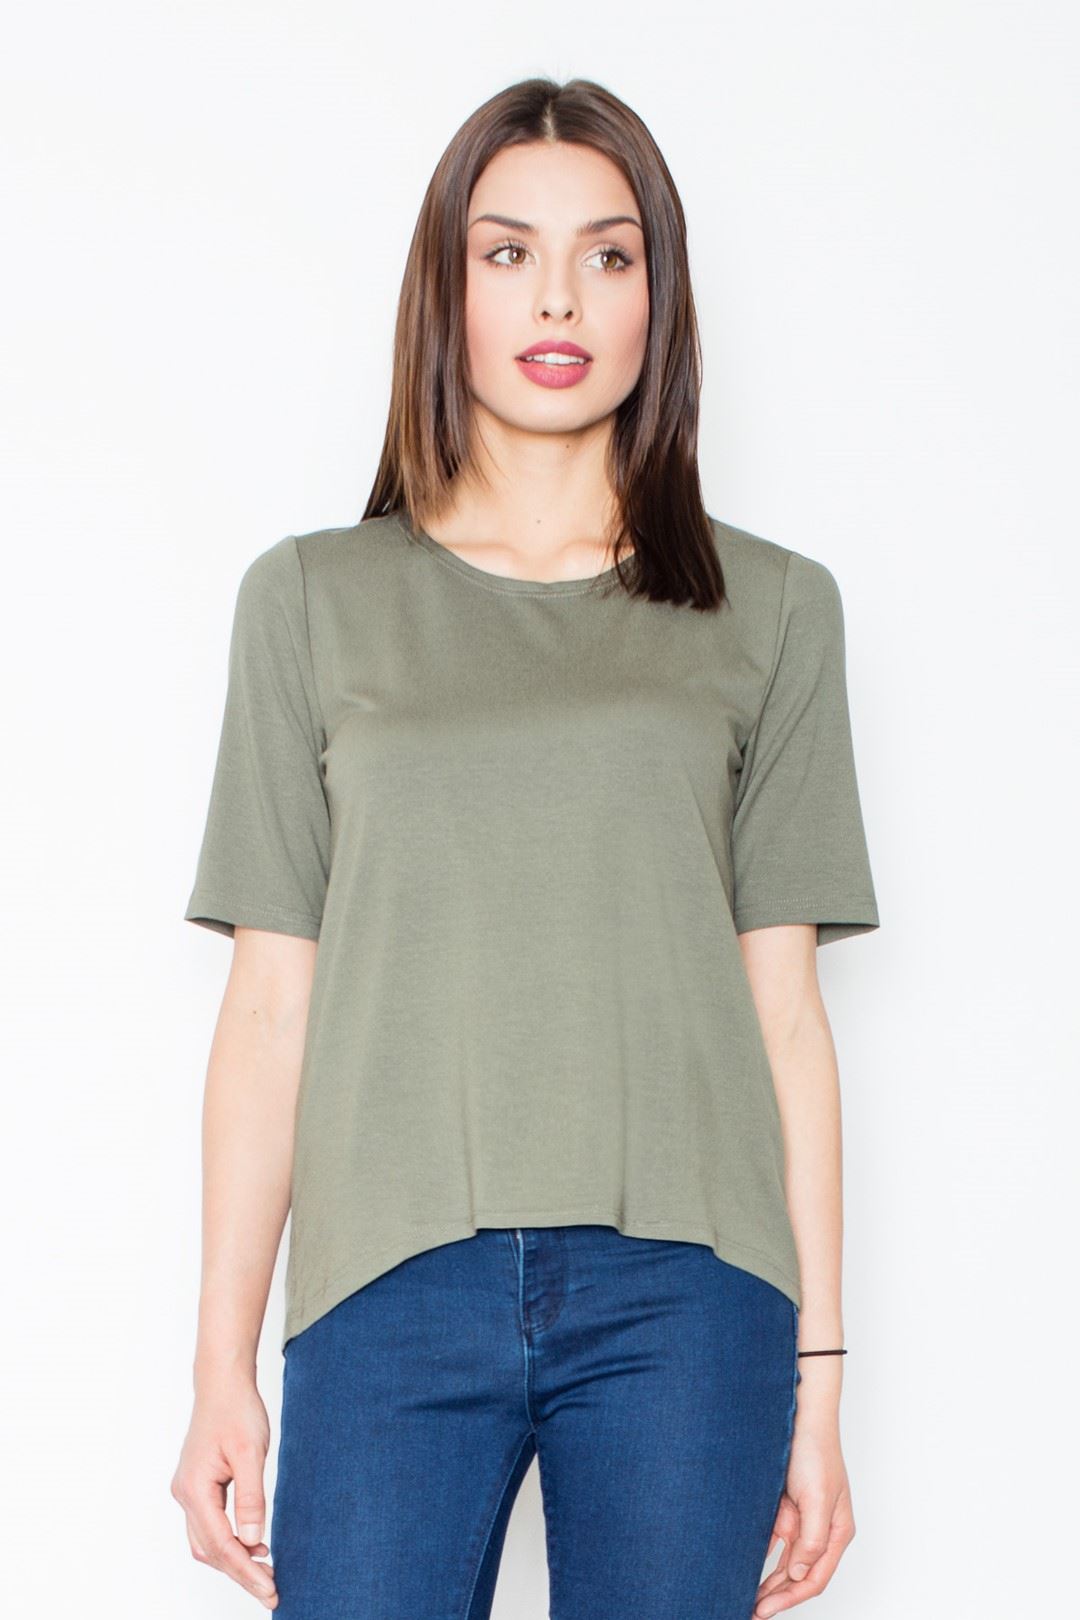 Blouse M436 Olive green XL